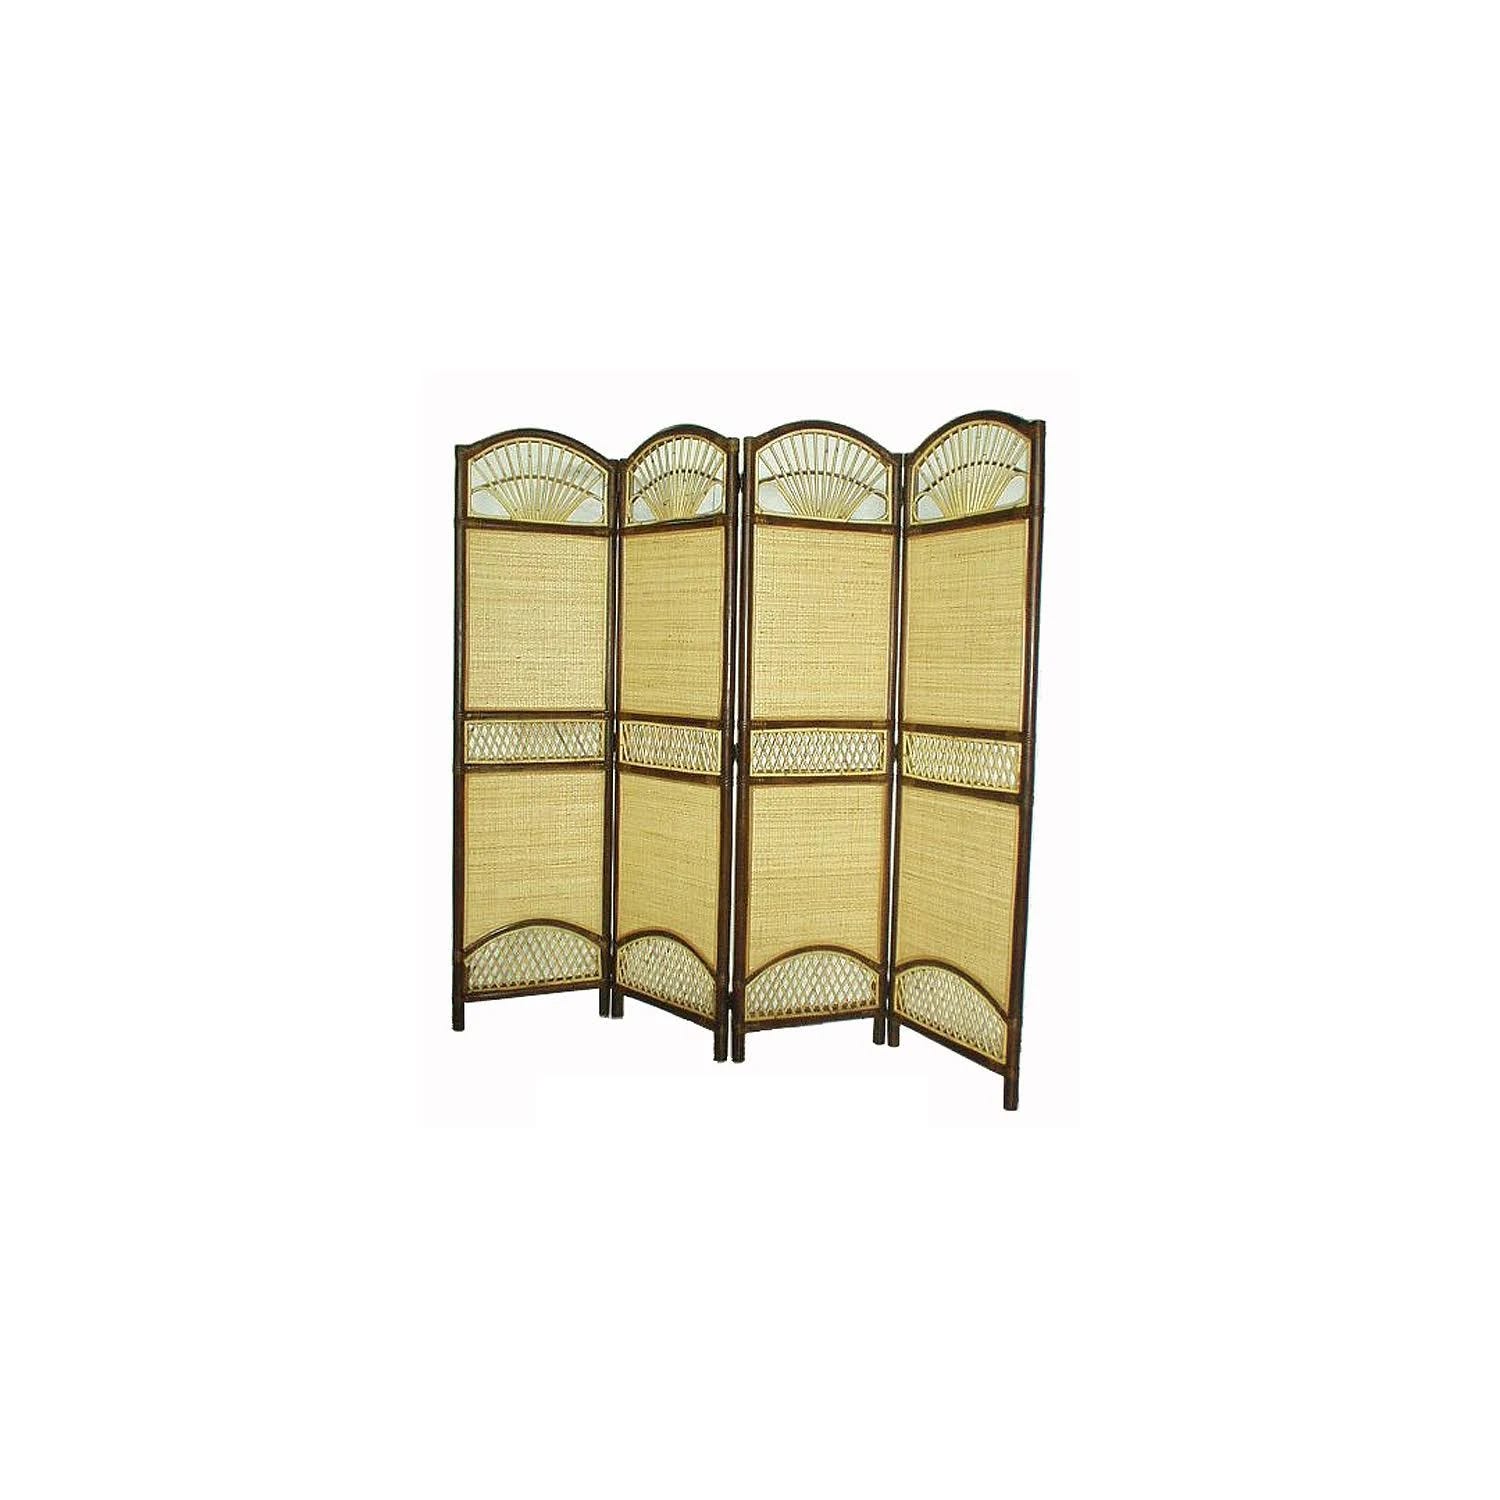 Rattan Room Divider with Bamboo Frame: Versatile and Stylish | Image